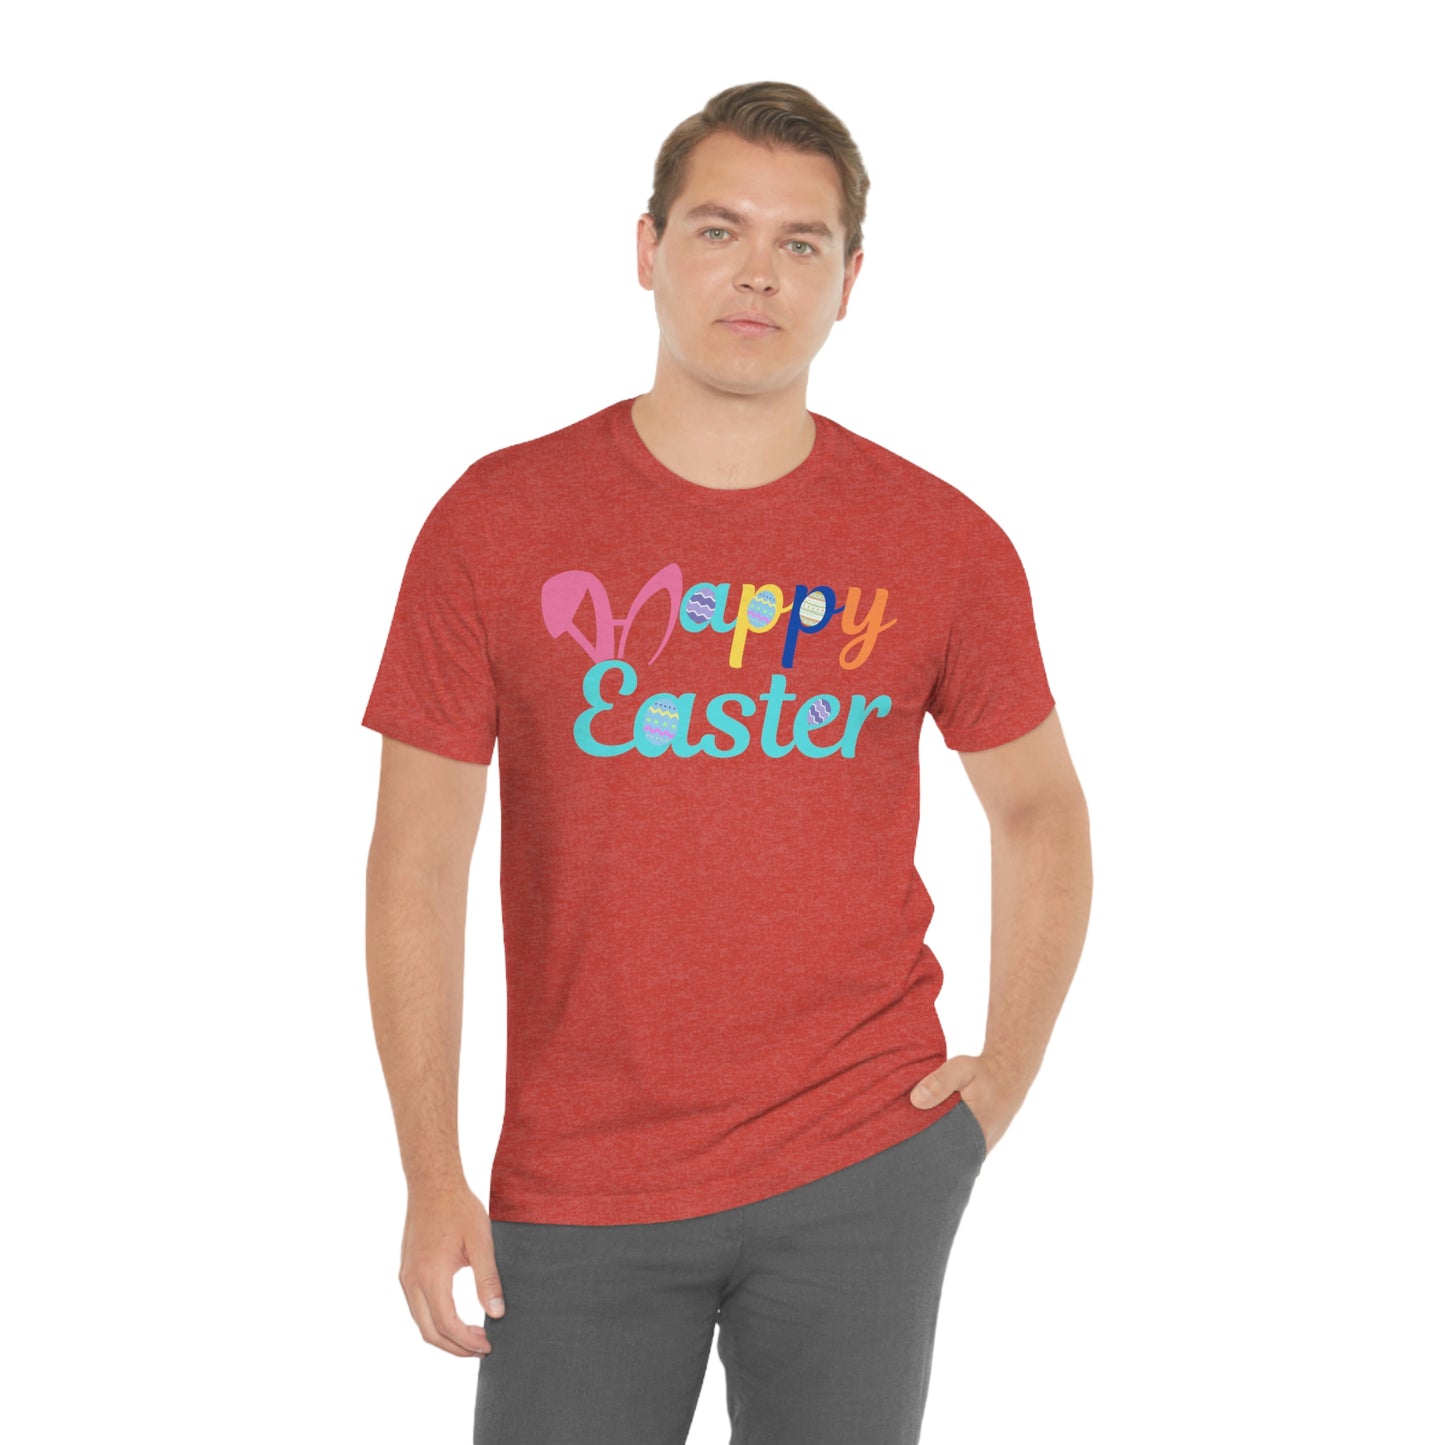 Happy Easter T-shirt, Easter gift for adults, easter shirts